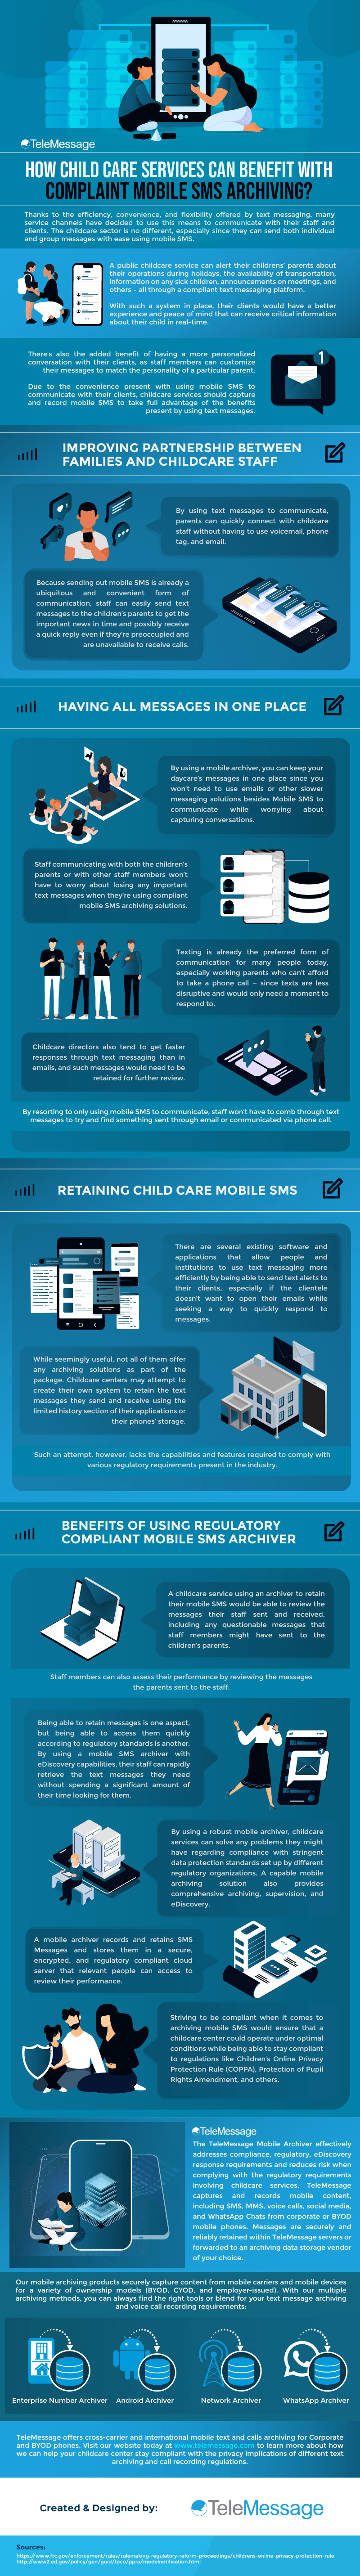 How Child Care Services Can Benefit with Compliant Mobile SMS Archiving